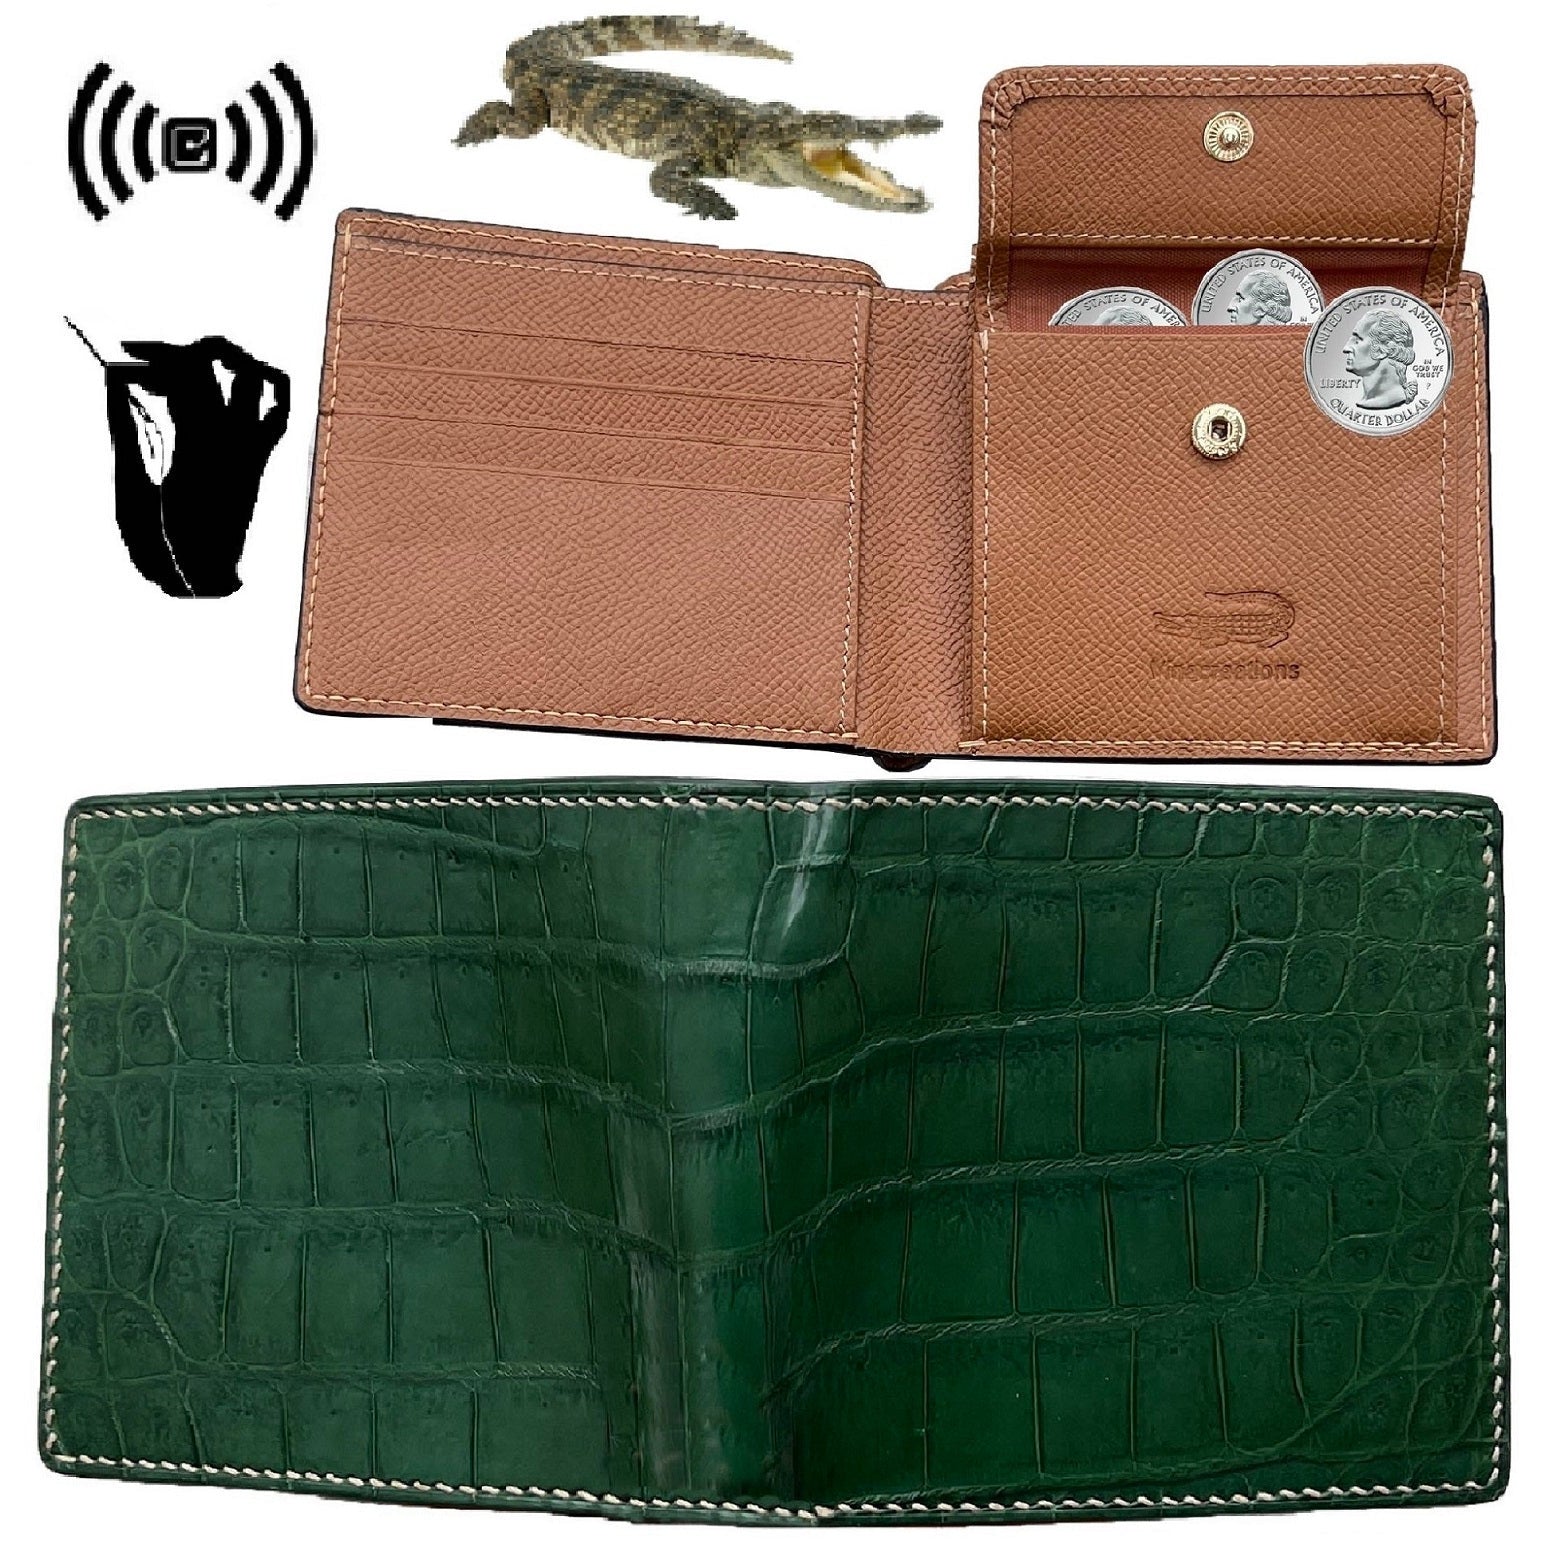 Wallet Men Leather Genuine Cow Leather Man Wallets With Coin Pocket Man Purse  leather Money Bag Male Wallets Wholesale|Wallets|